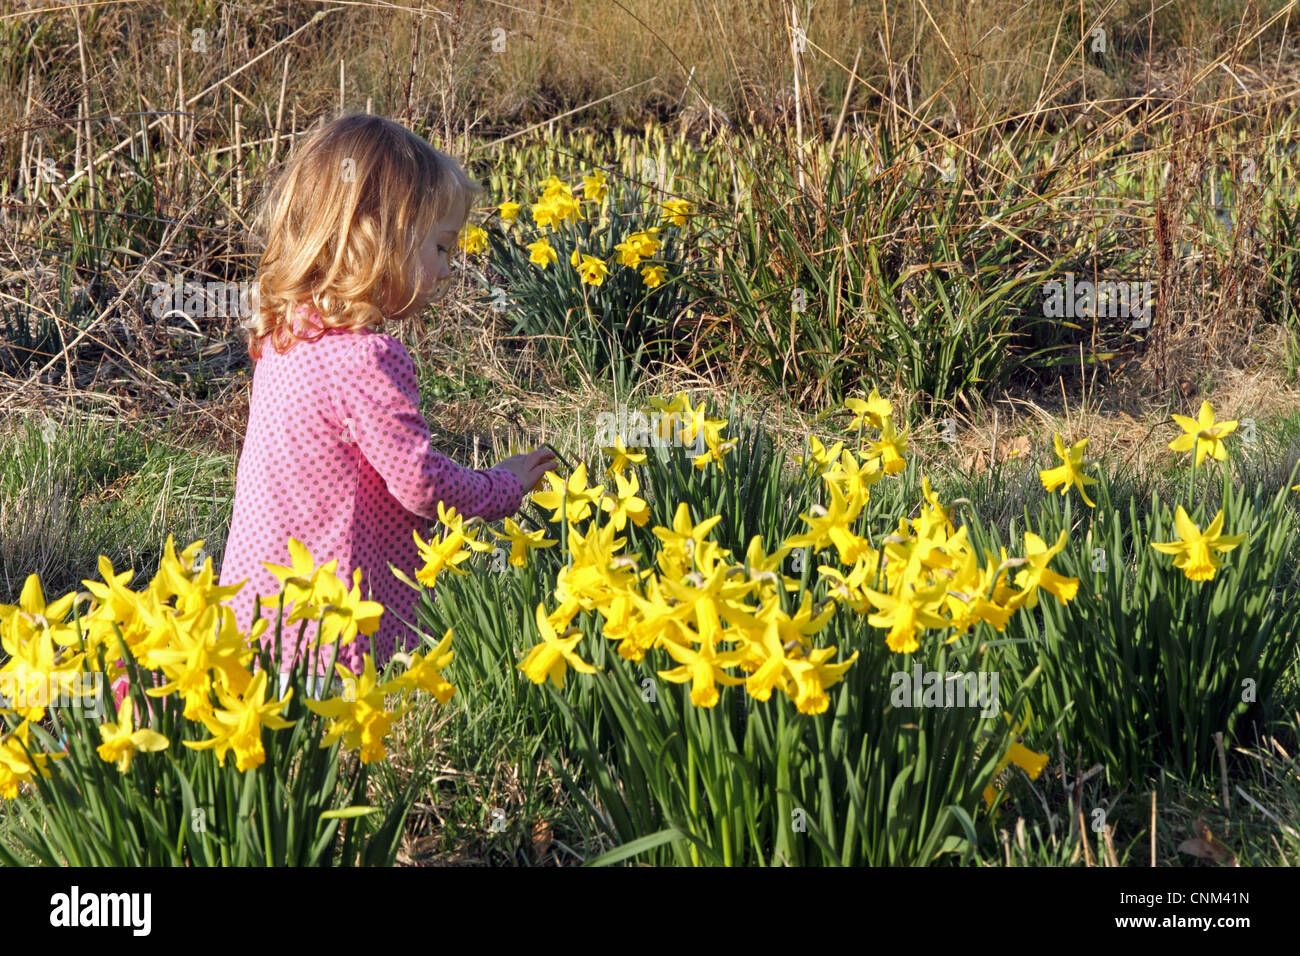 Young girl (2-year-old) plays among the daffodils in springtime England. Stock Photo